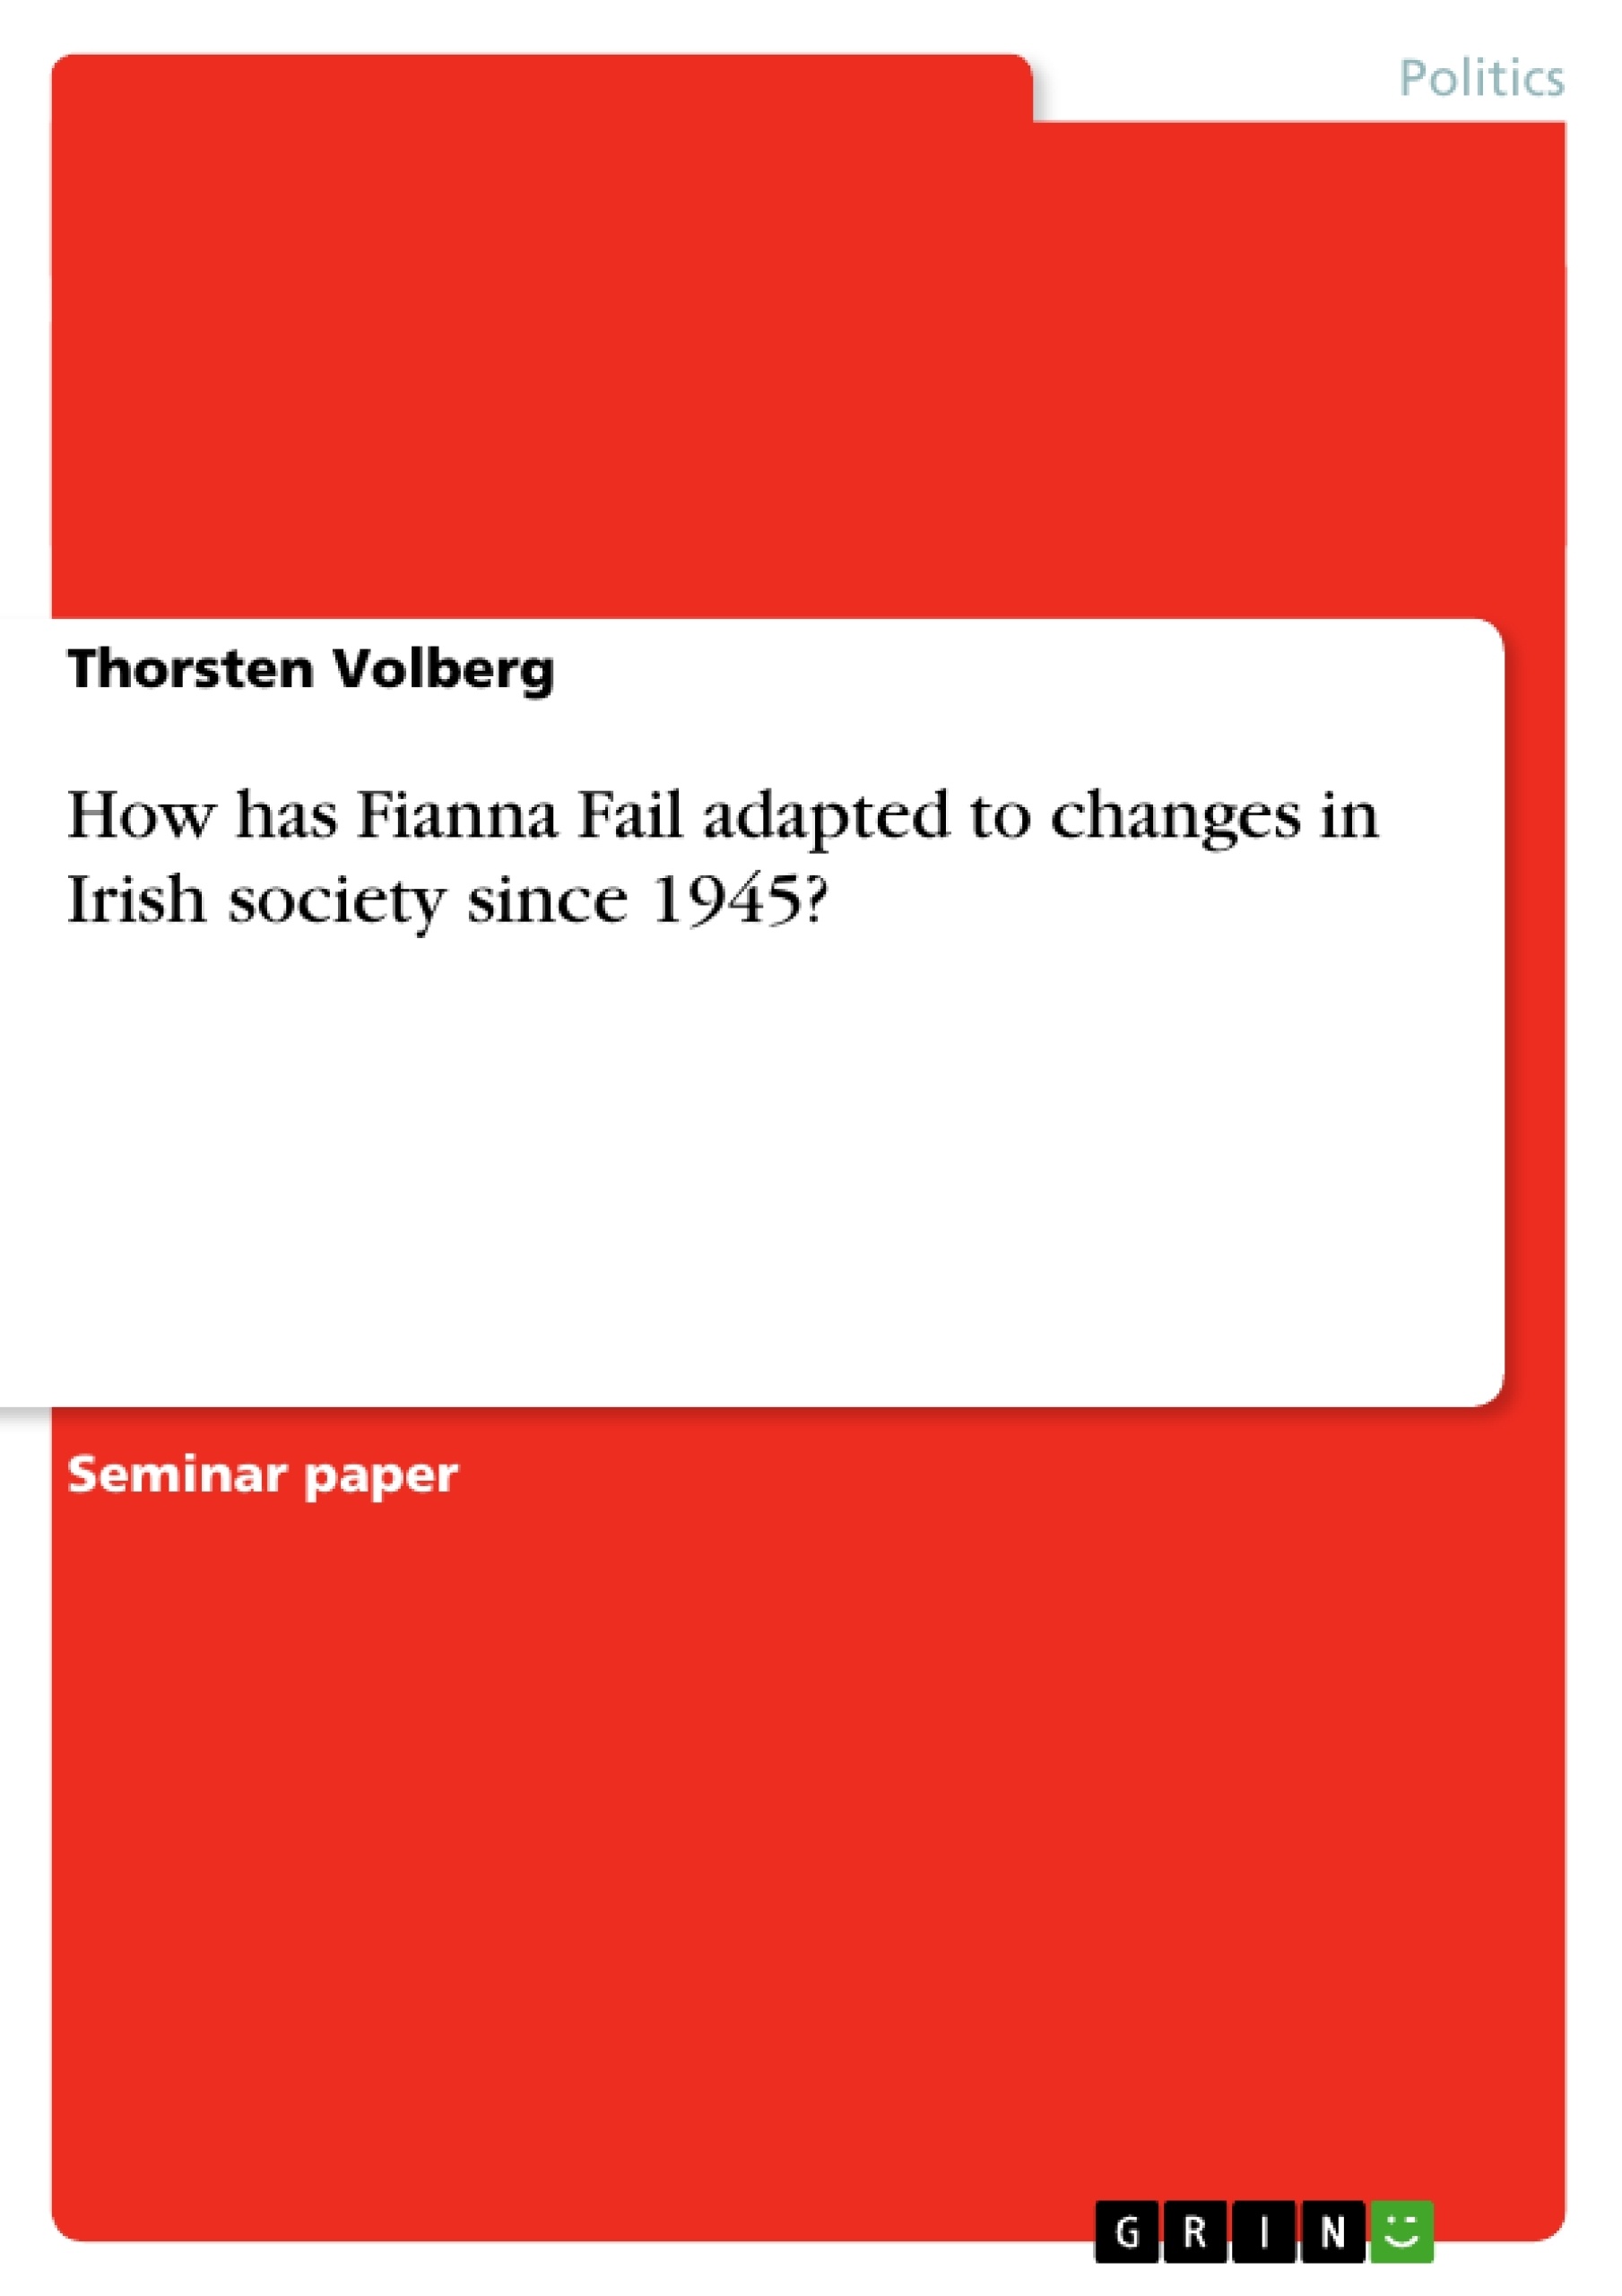 Title: How has Fianna Fail adapted to changes in Irish society since 1945?